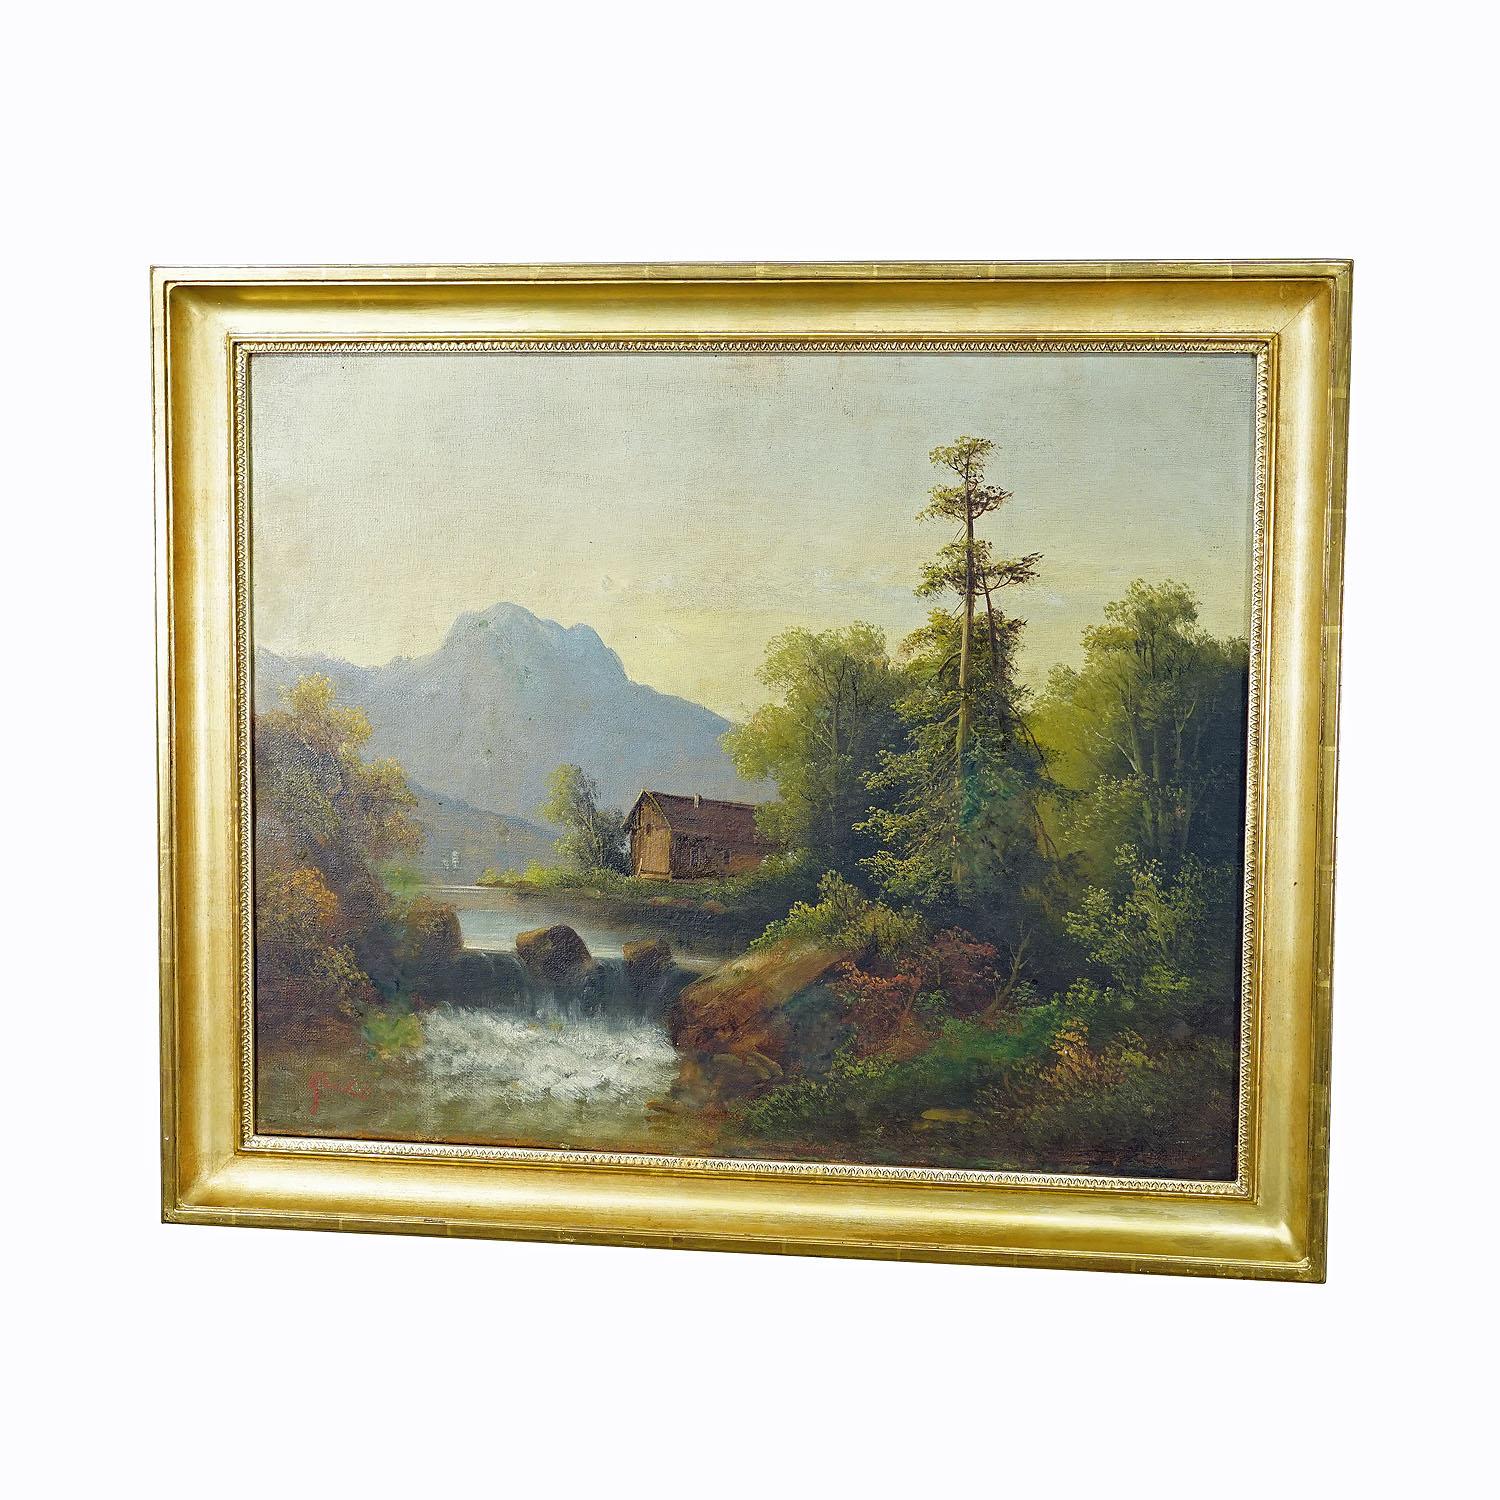 Summerly Mountain Landscape with Water Fall and Mountain Hut, 19th century

An antique oil painting depicting a mountain landscape with waterfall in front of a mountain shelter. Painted on canvas with pastell colors. Framed with antique decorative